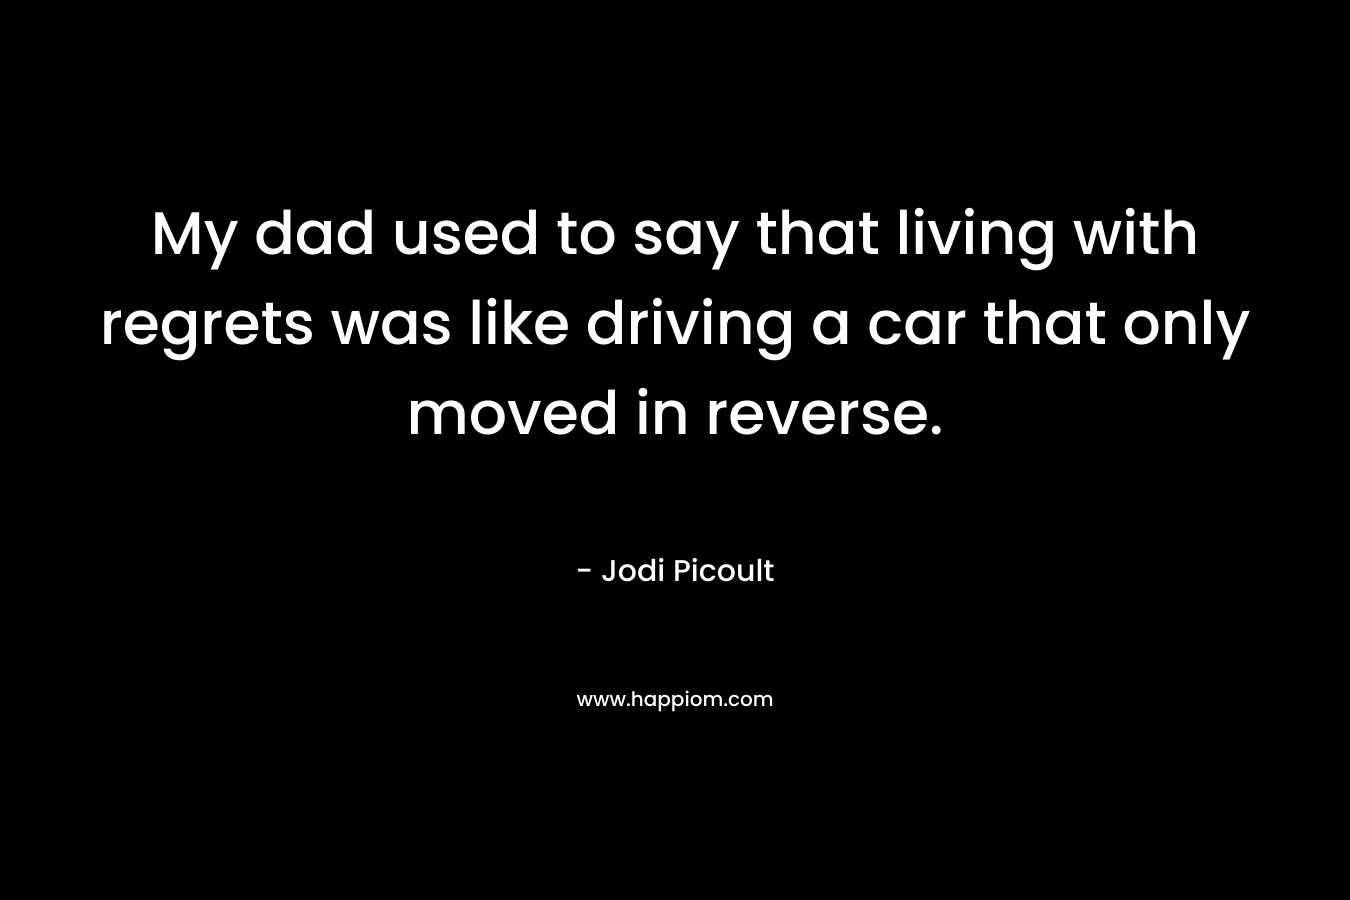 My dad used to say that living with regrets was like driving a car that only moved in reverse. – Jodi Picoult